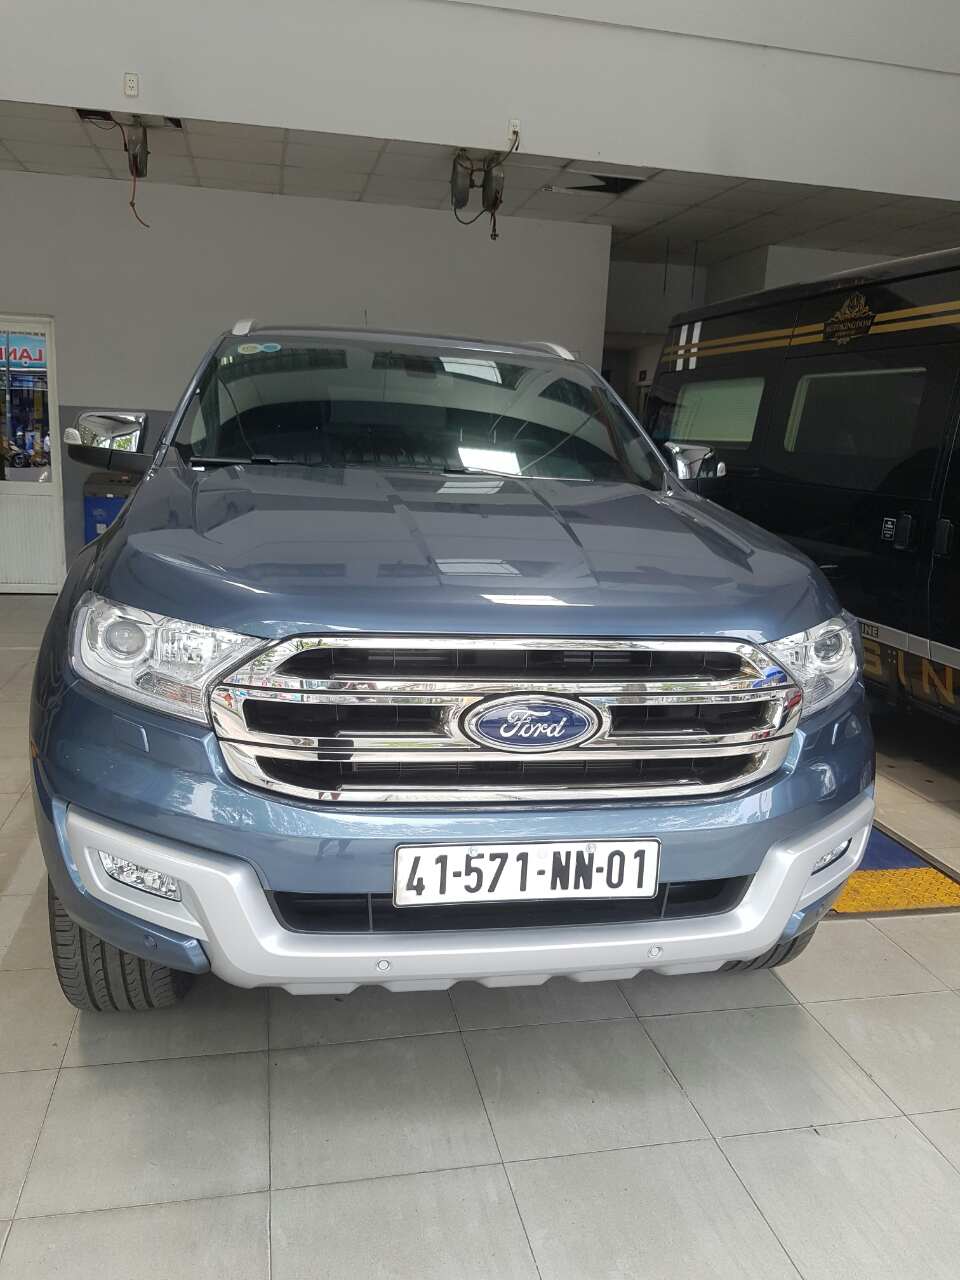 Ford Everest Trend 2016 - Ford Everest 2.2 Trend, 1 tỷ 060 triệu, giao xe ngay, đủ màu, 0938 055 993